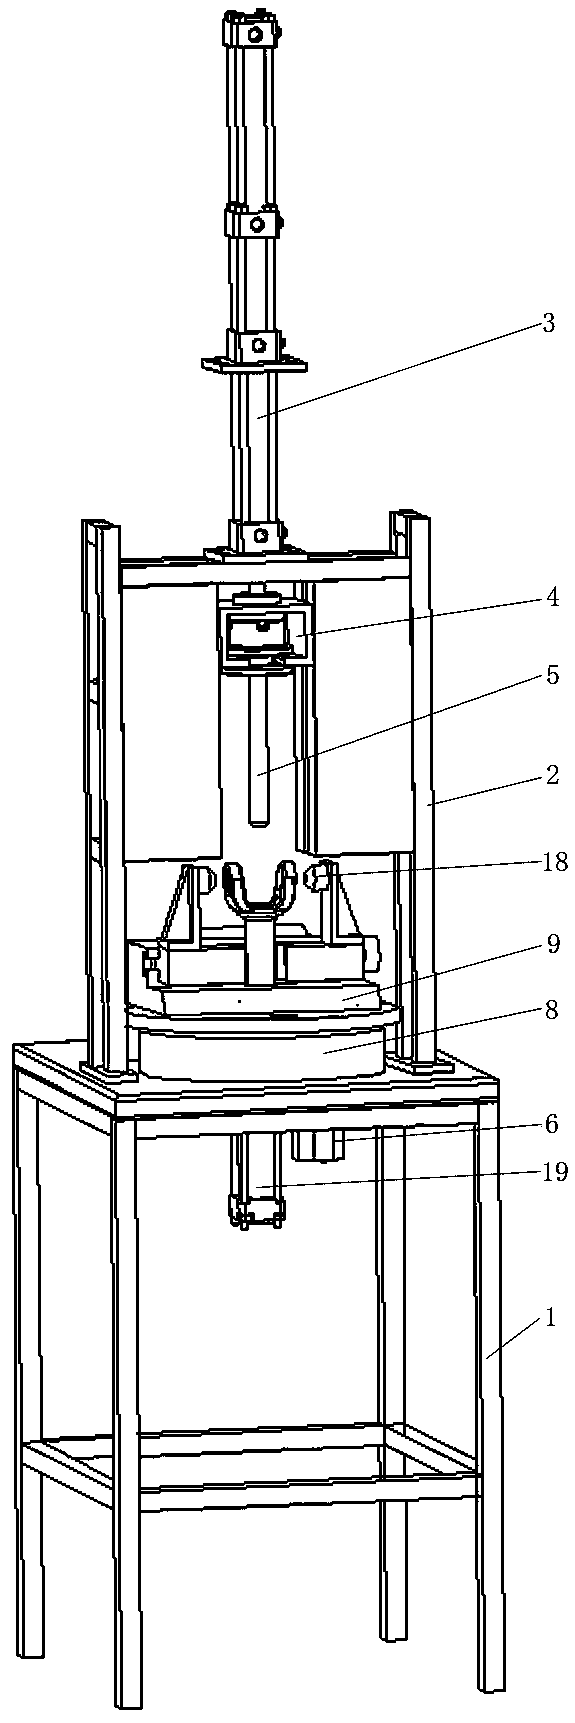 An automatic pressing device for a sliding fork and a spline mandrel